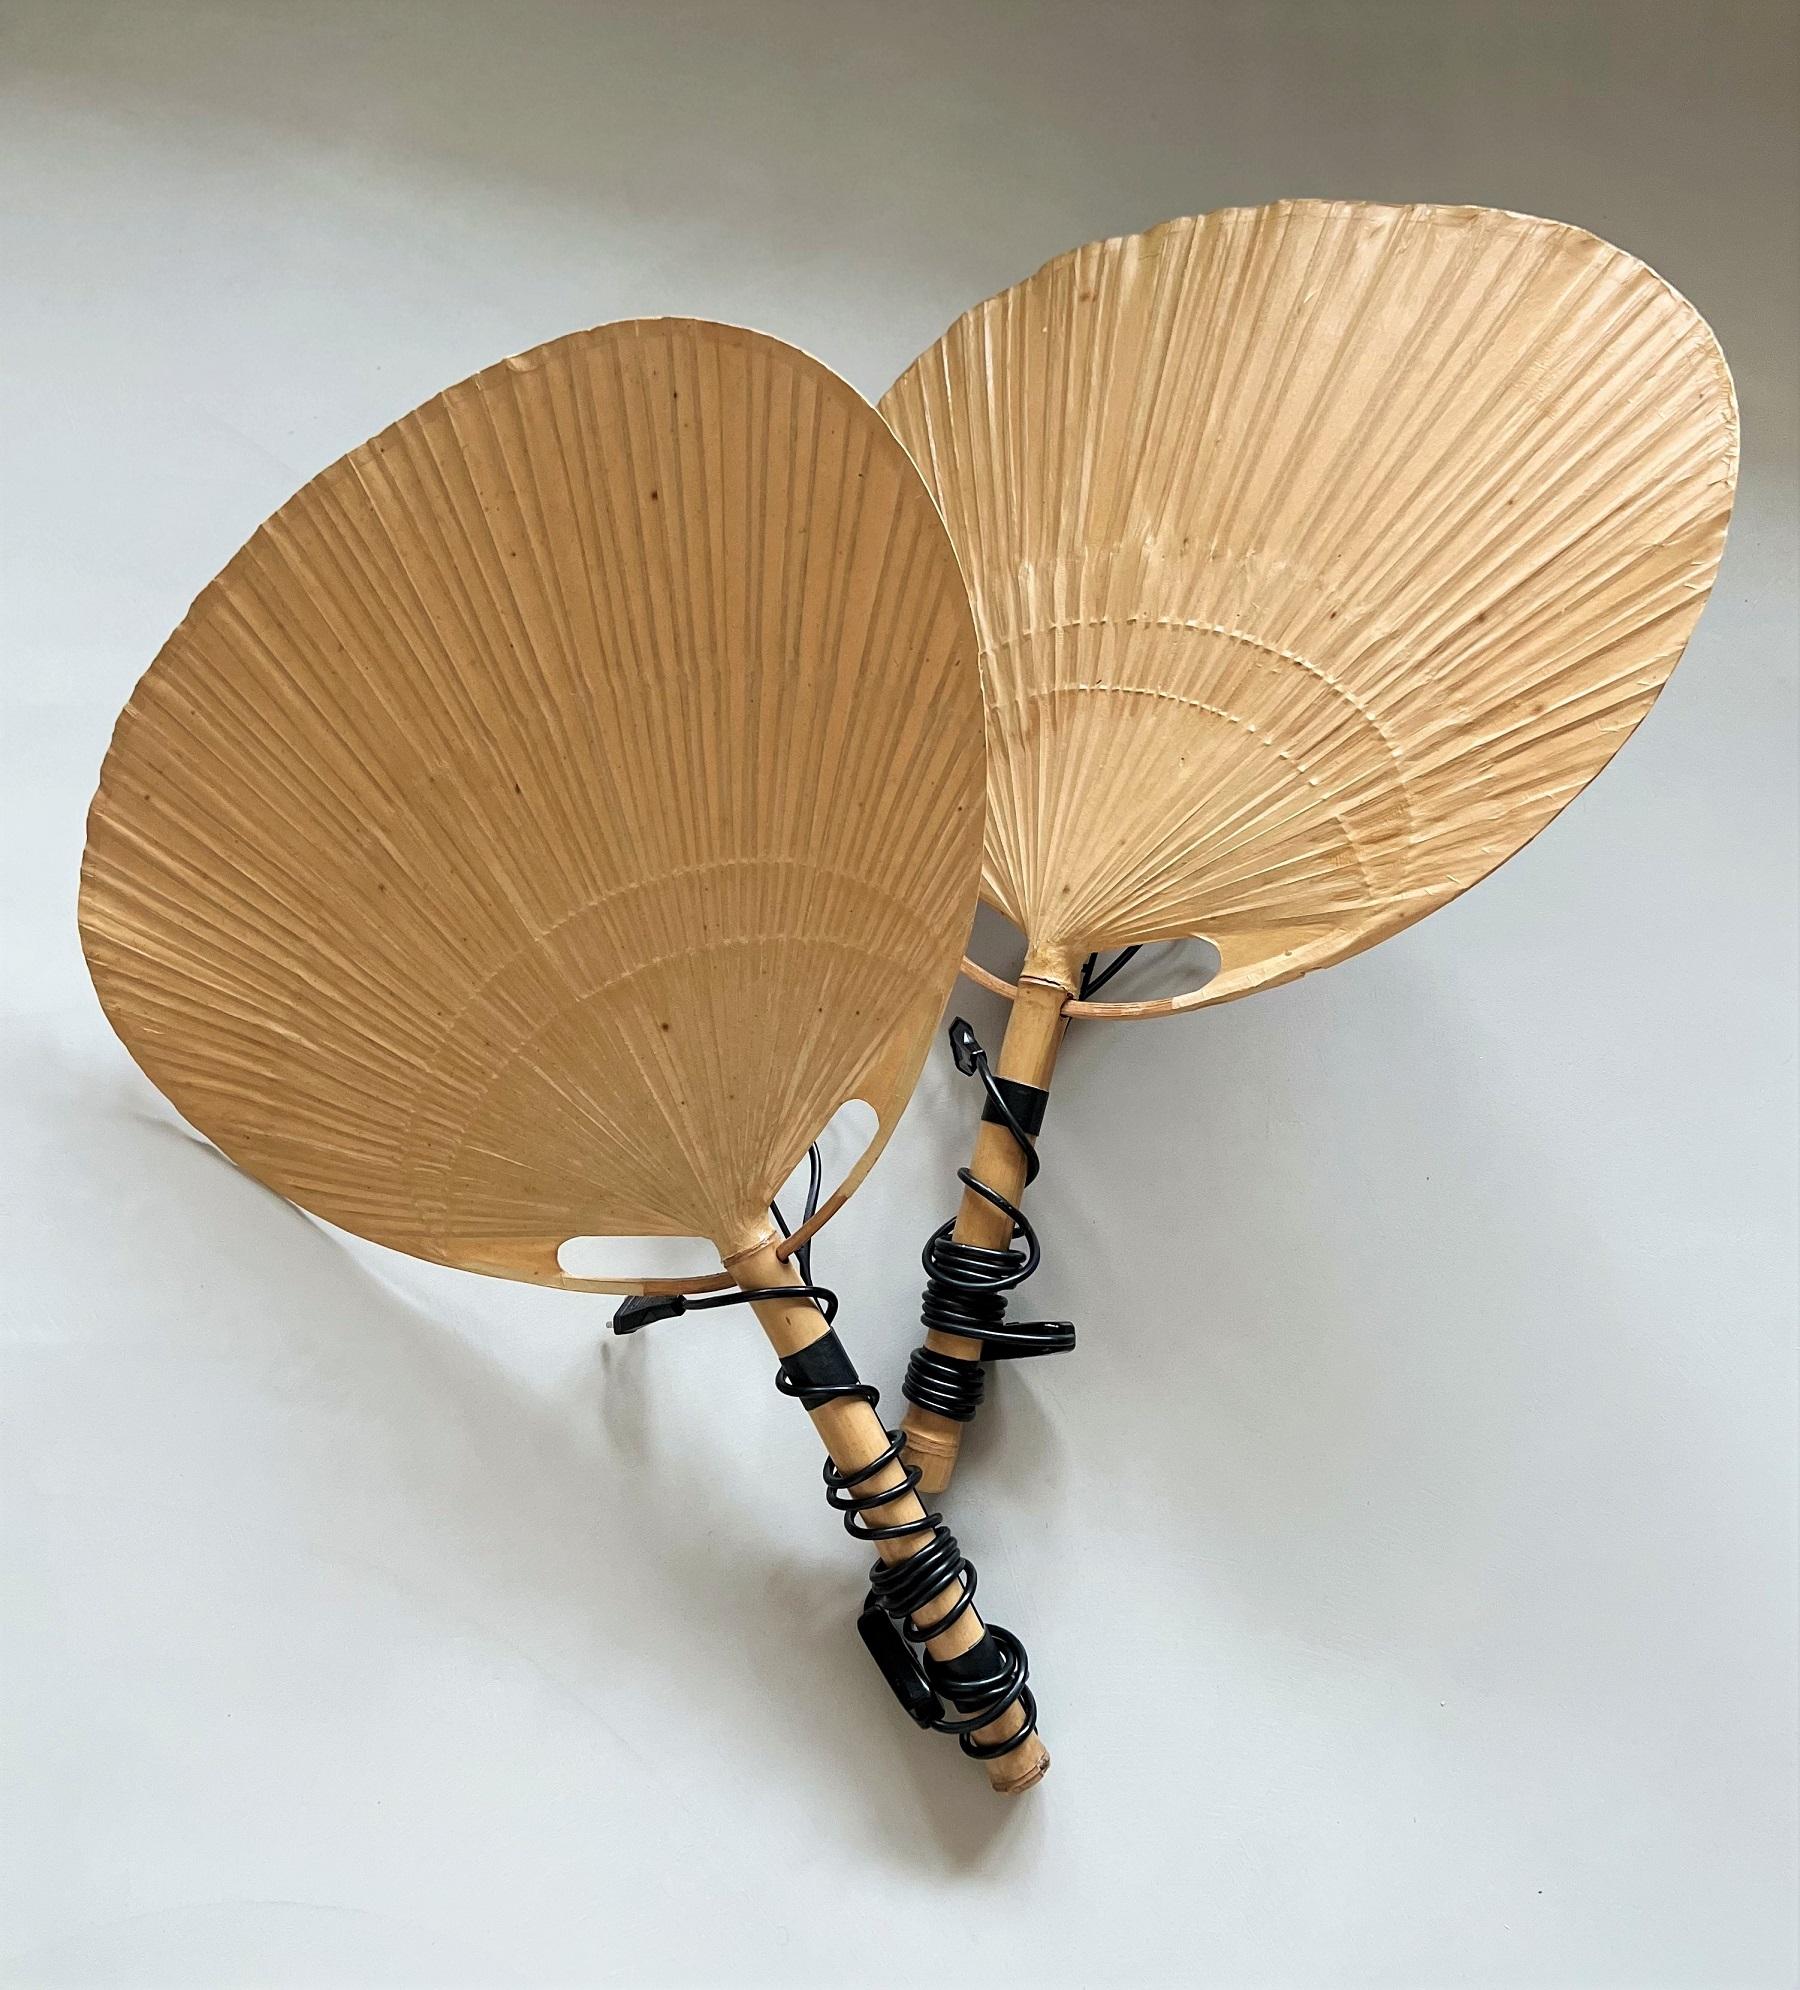 Two pieces of big vintage Uchiwa fan lamps with metal holder for wall hanging.
Designed from Ingo Maurer, Germany in 1973.
All fans are handmade of bamboo and Japanese rice paper.
The lamps are equipped with original metal holders with Edison bulb